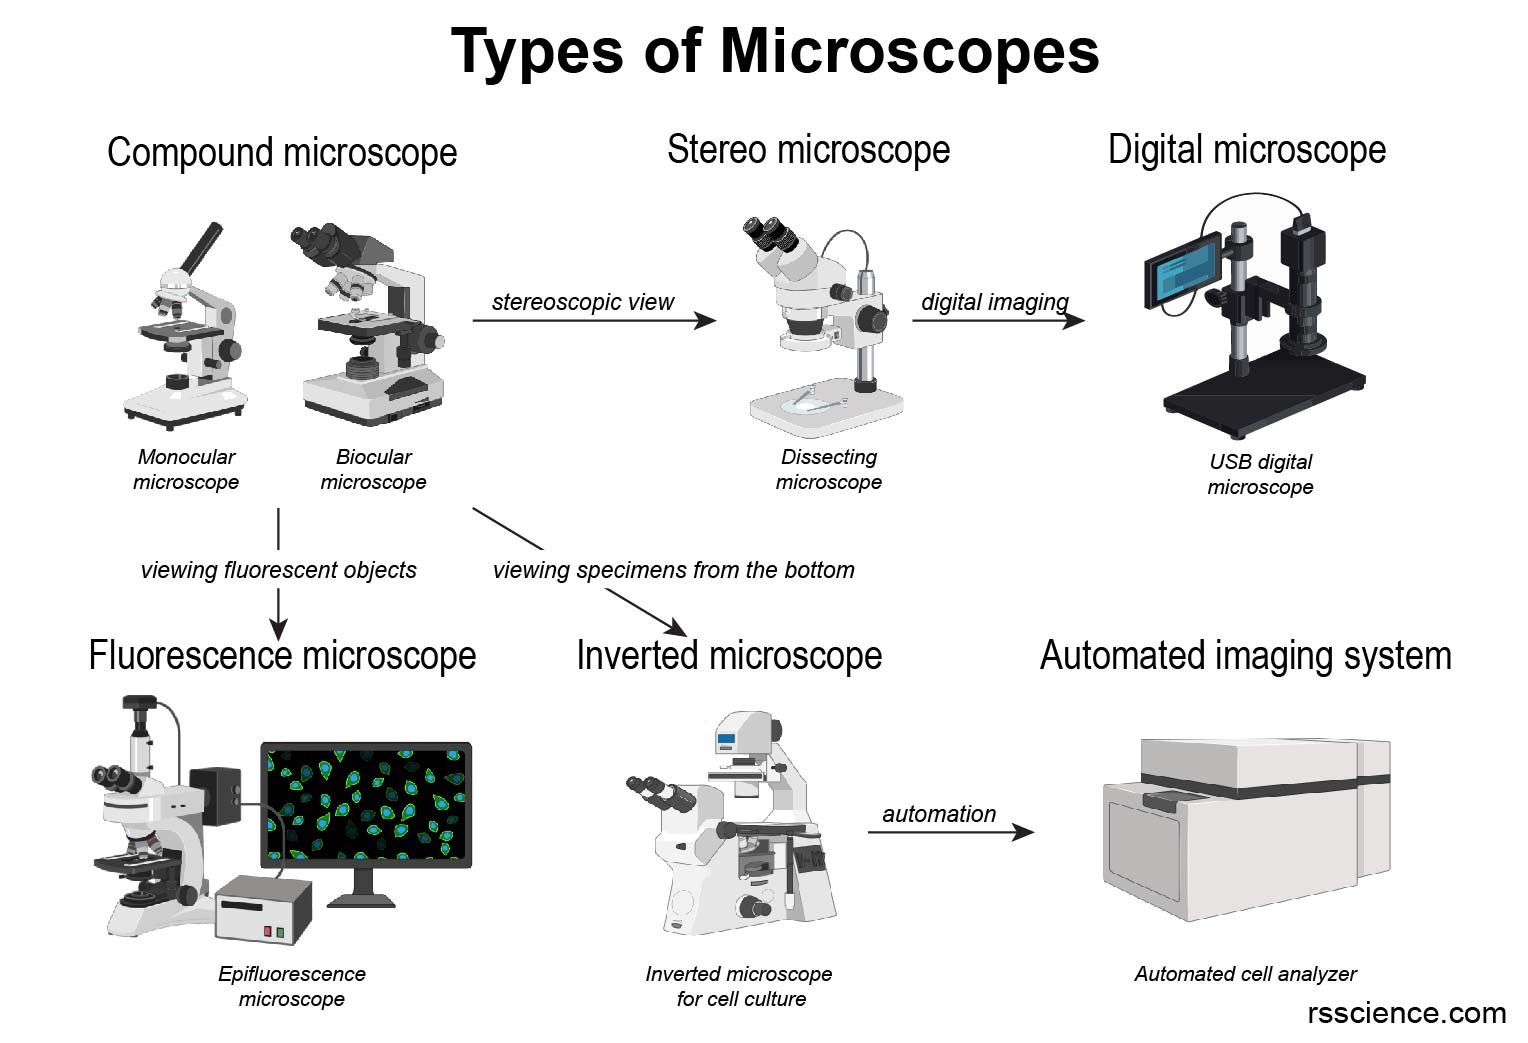 how is a light microscope similar to an electron microscope